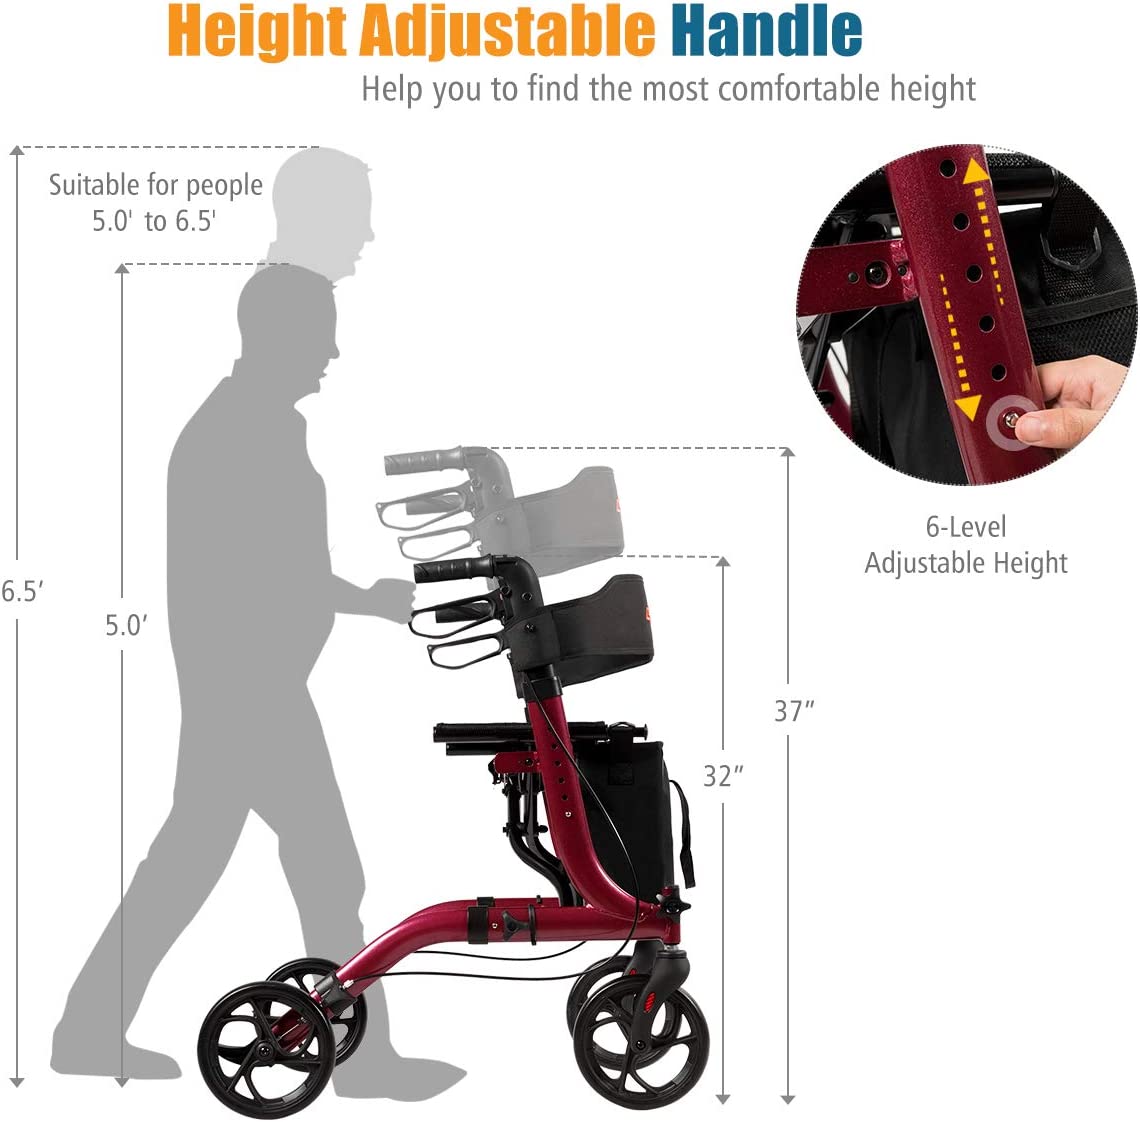 Chairliving Folding Rollator Walkers Lightweight Medical Drive Walker Mobility Walking Aid with Adjustable Handle and Storage Bag